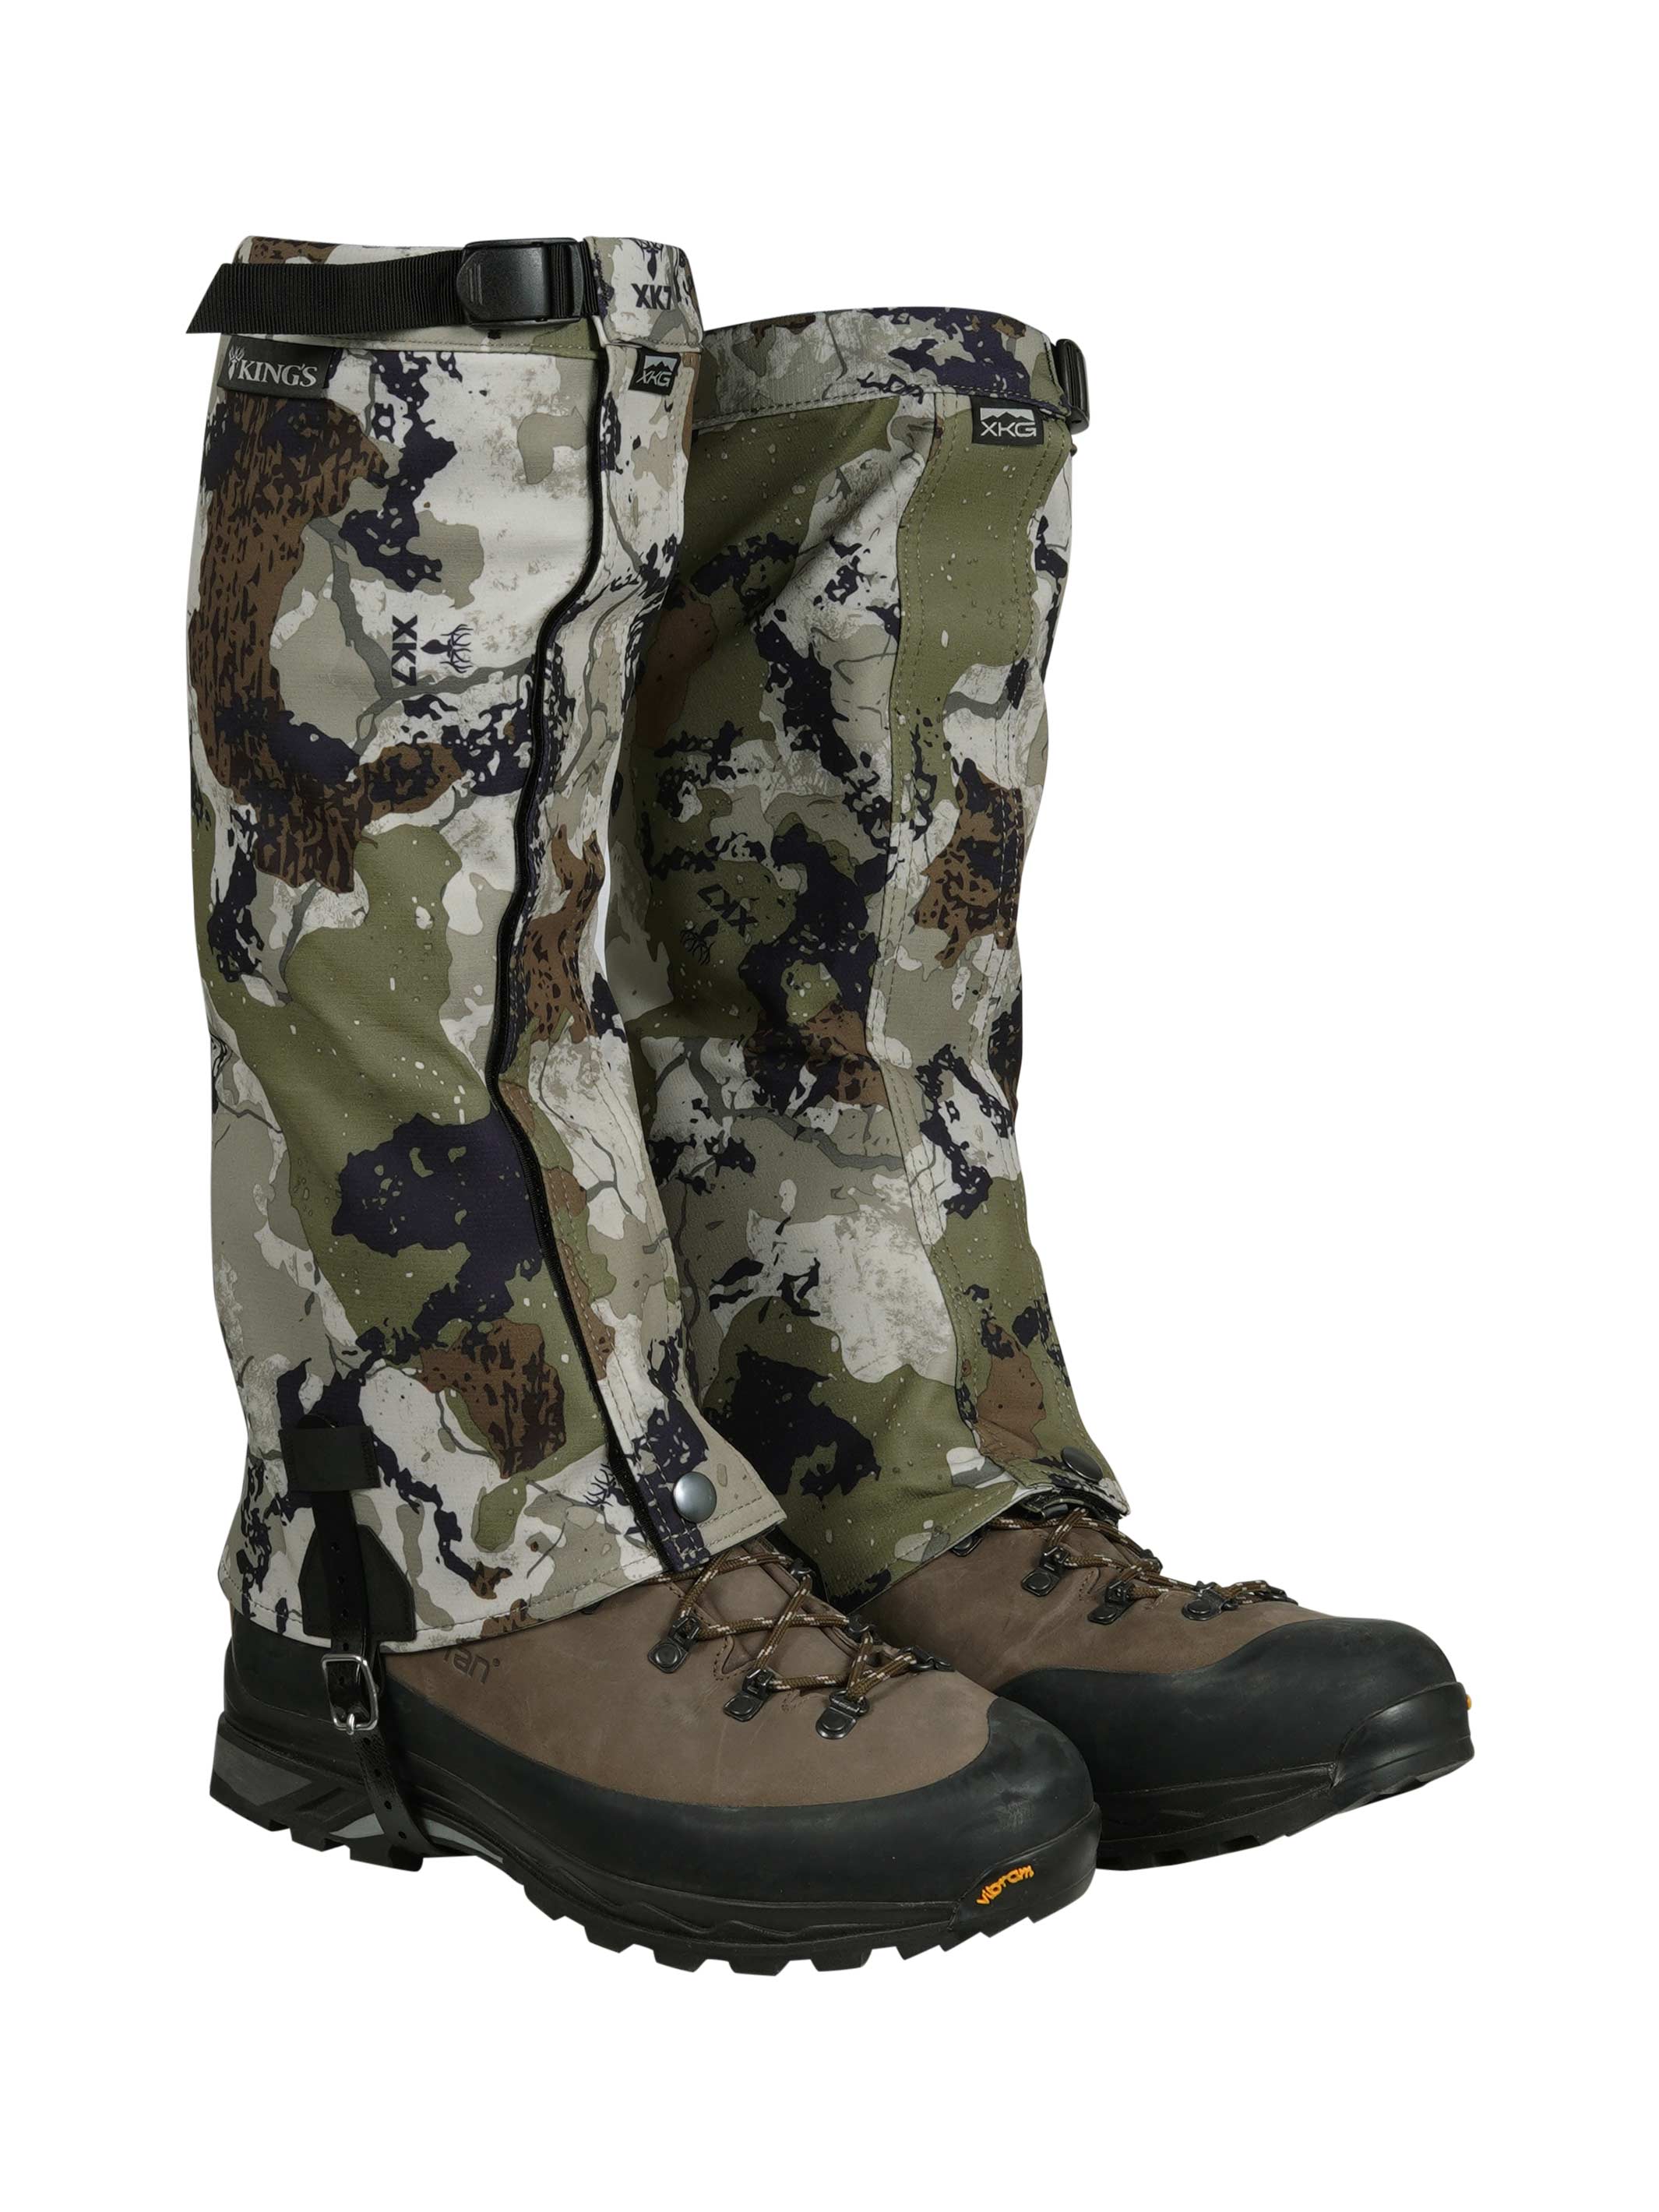 Camo Leg Gaiters for Hunting